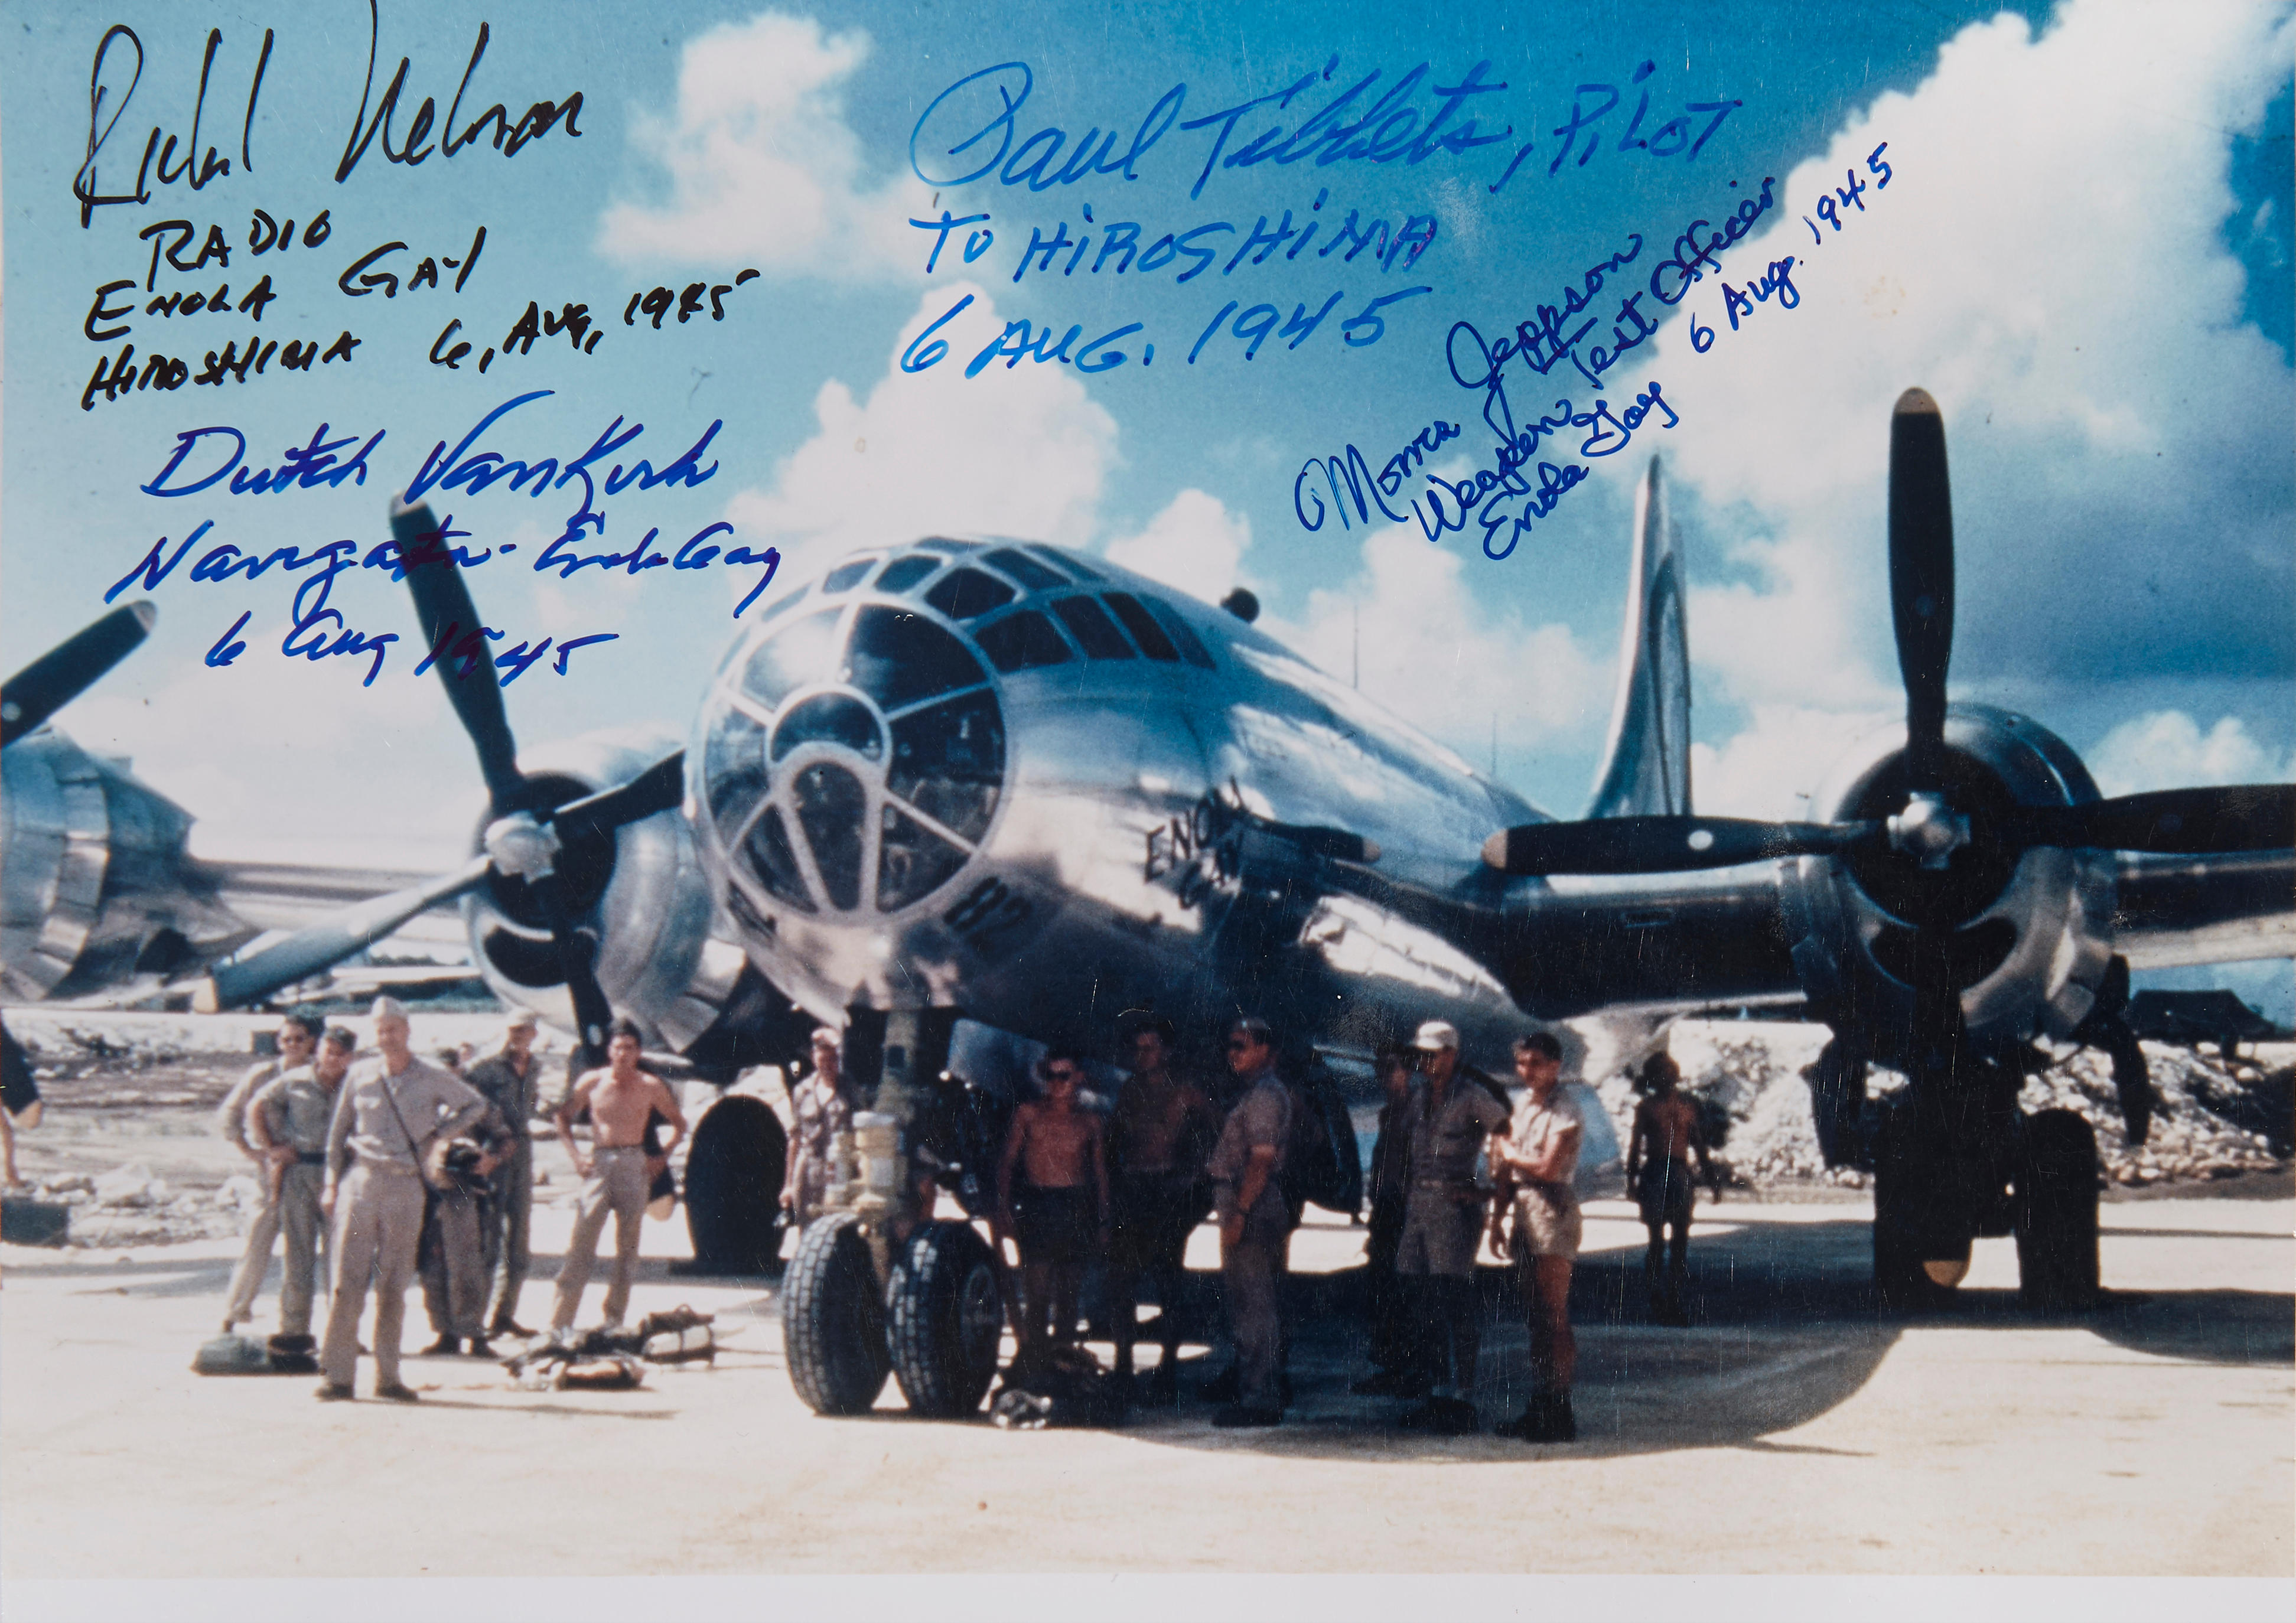 signed photo of all crew of enola gay